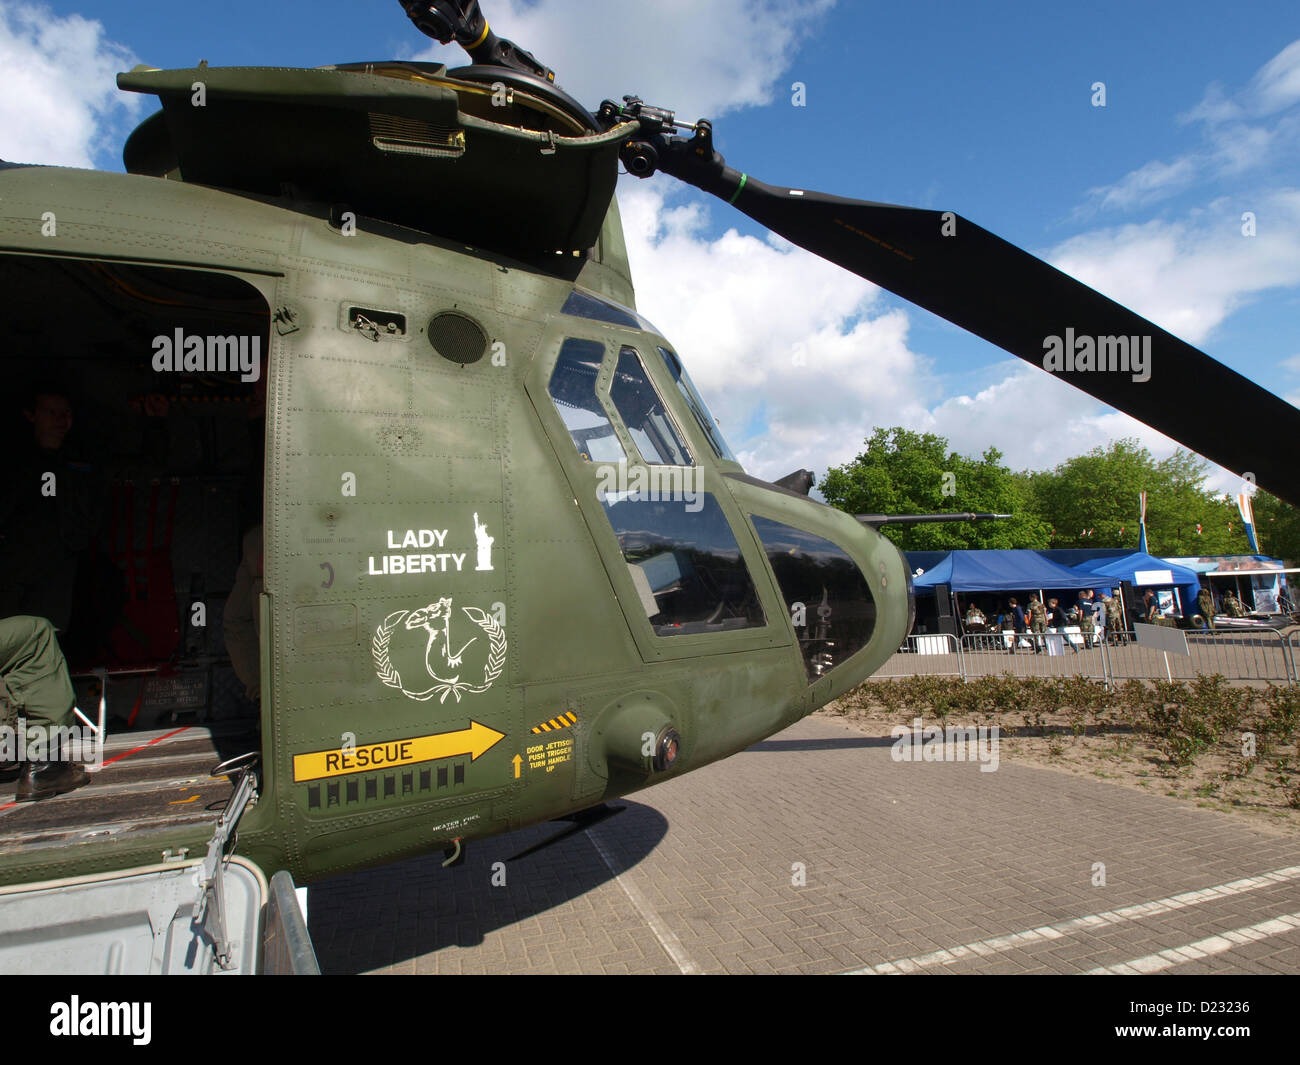 Army Open Day 2012 in the Netherlands Oirschot,Boeing CH-47D Chinook Royal Dutch Army Stock Photo